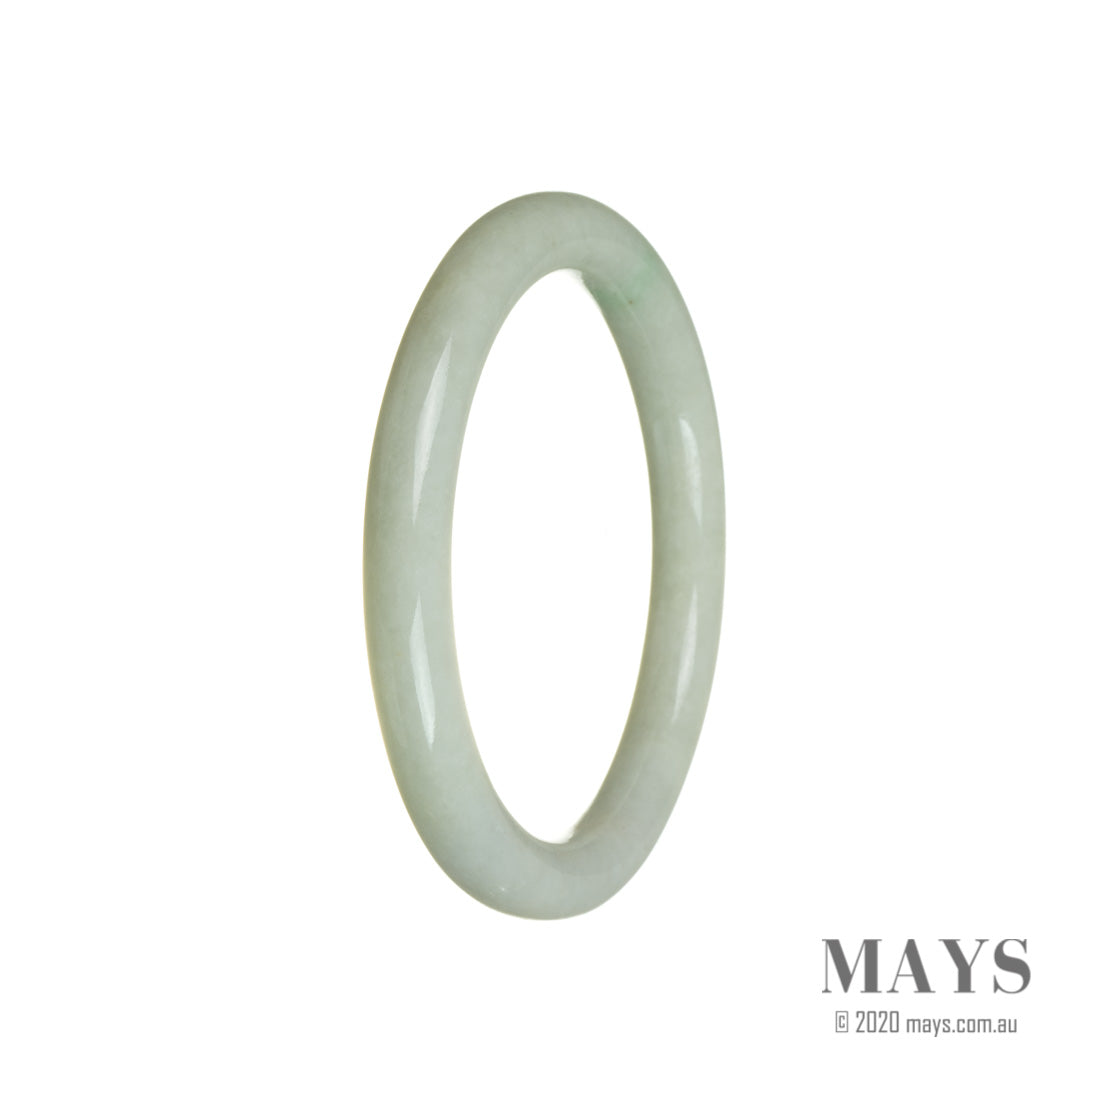 A pale green jade bangle bracelet with a certification as Type A Burma Jade, measuring 58mm in an oval shape. Sold by MAYS GEMS.